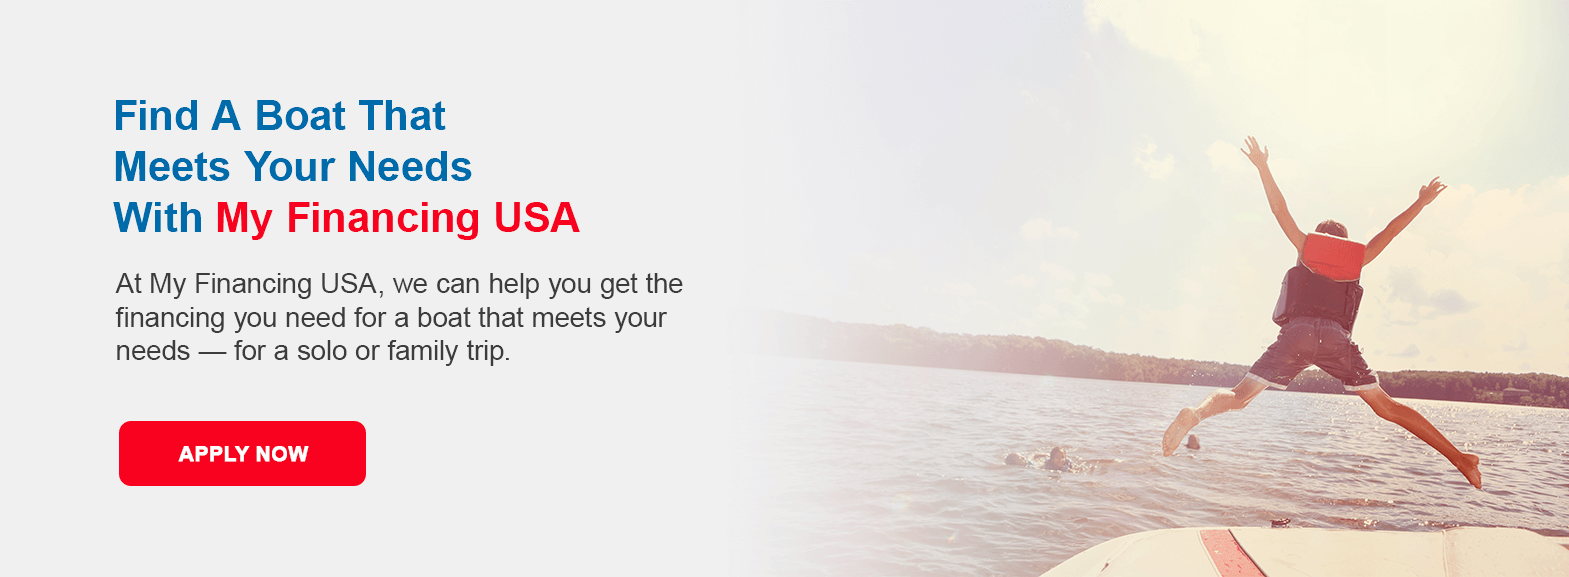 Find A Boat That Meets Your Needs With My Financing USA. At My Financing USA, we can help you get the financing you need for a boat that meets your needs — for a solo or family trip. Apply now!